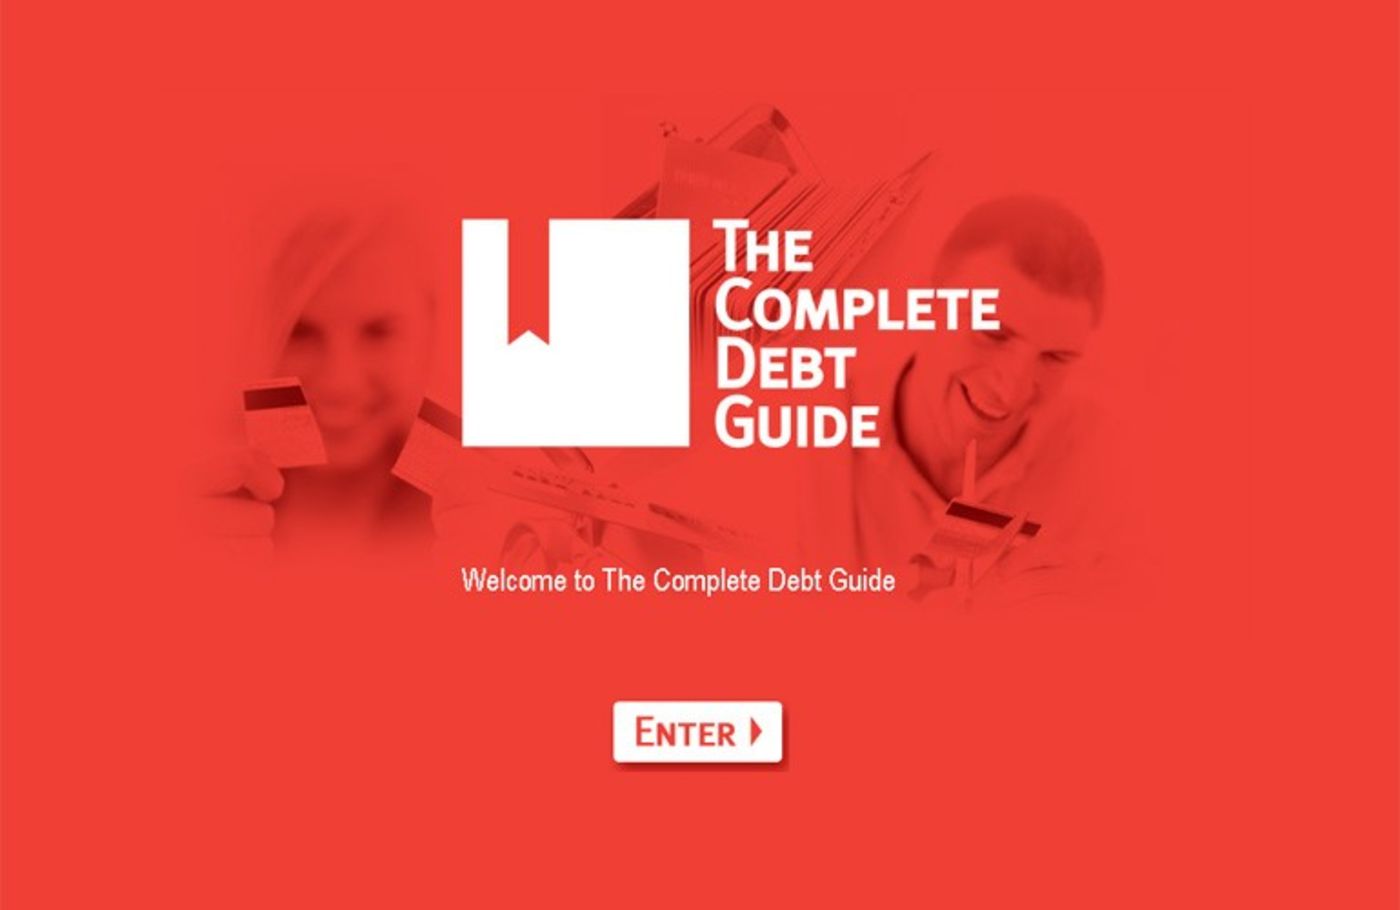 The Complete Debt Guide Welcome